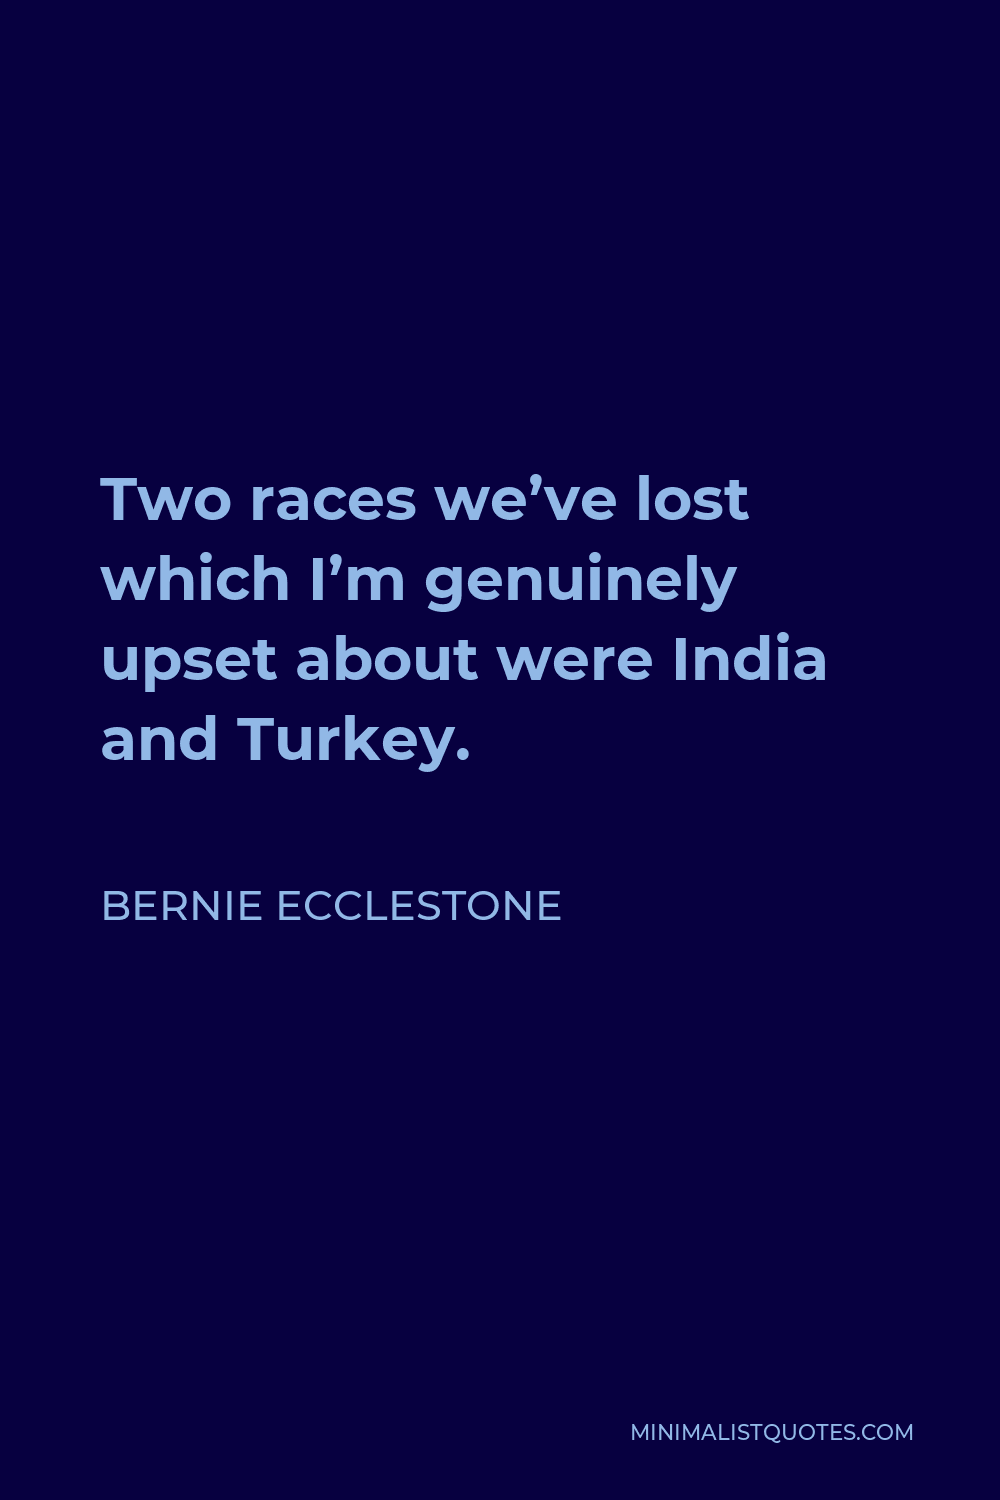 Bernie Ecclestone Quote - Two races we’ve lost which I’m genuinely upset about were India and Turkey.